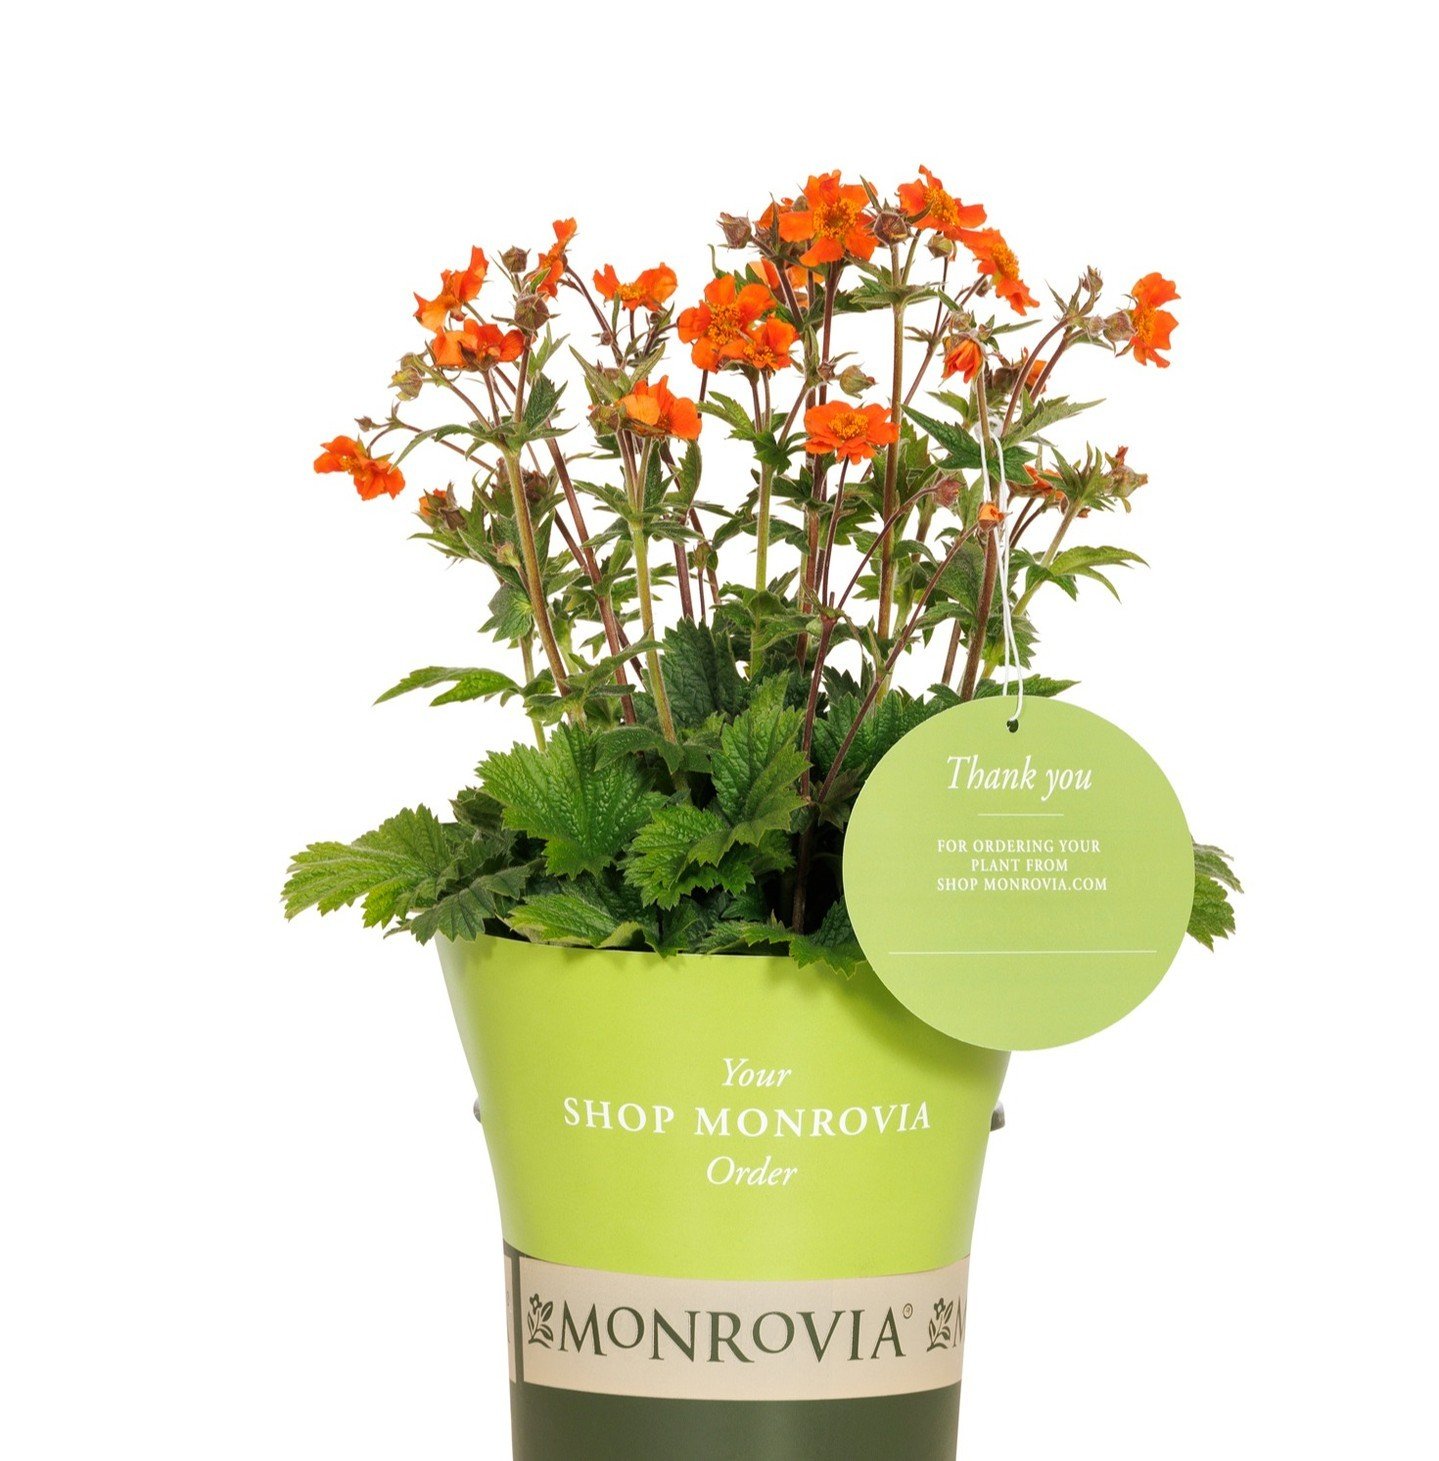 Did you know every ShopMonrovia online order arrives at our store with a special name tag on it? That's how we know to save it just for you! 

Just order your must-have plants at Monrovia.com. When it arrives, we'll give you a call to let you know it